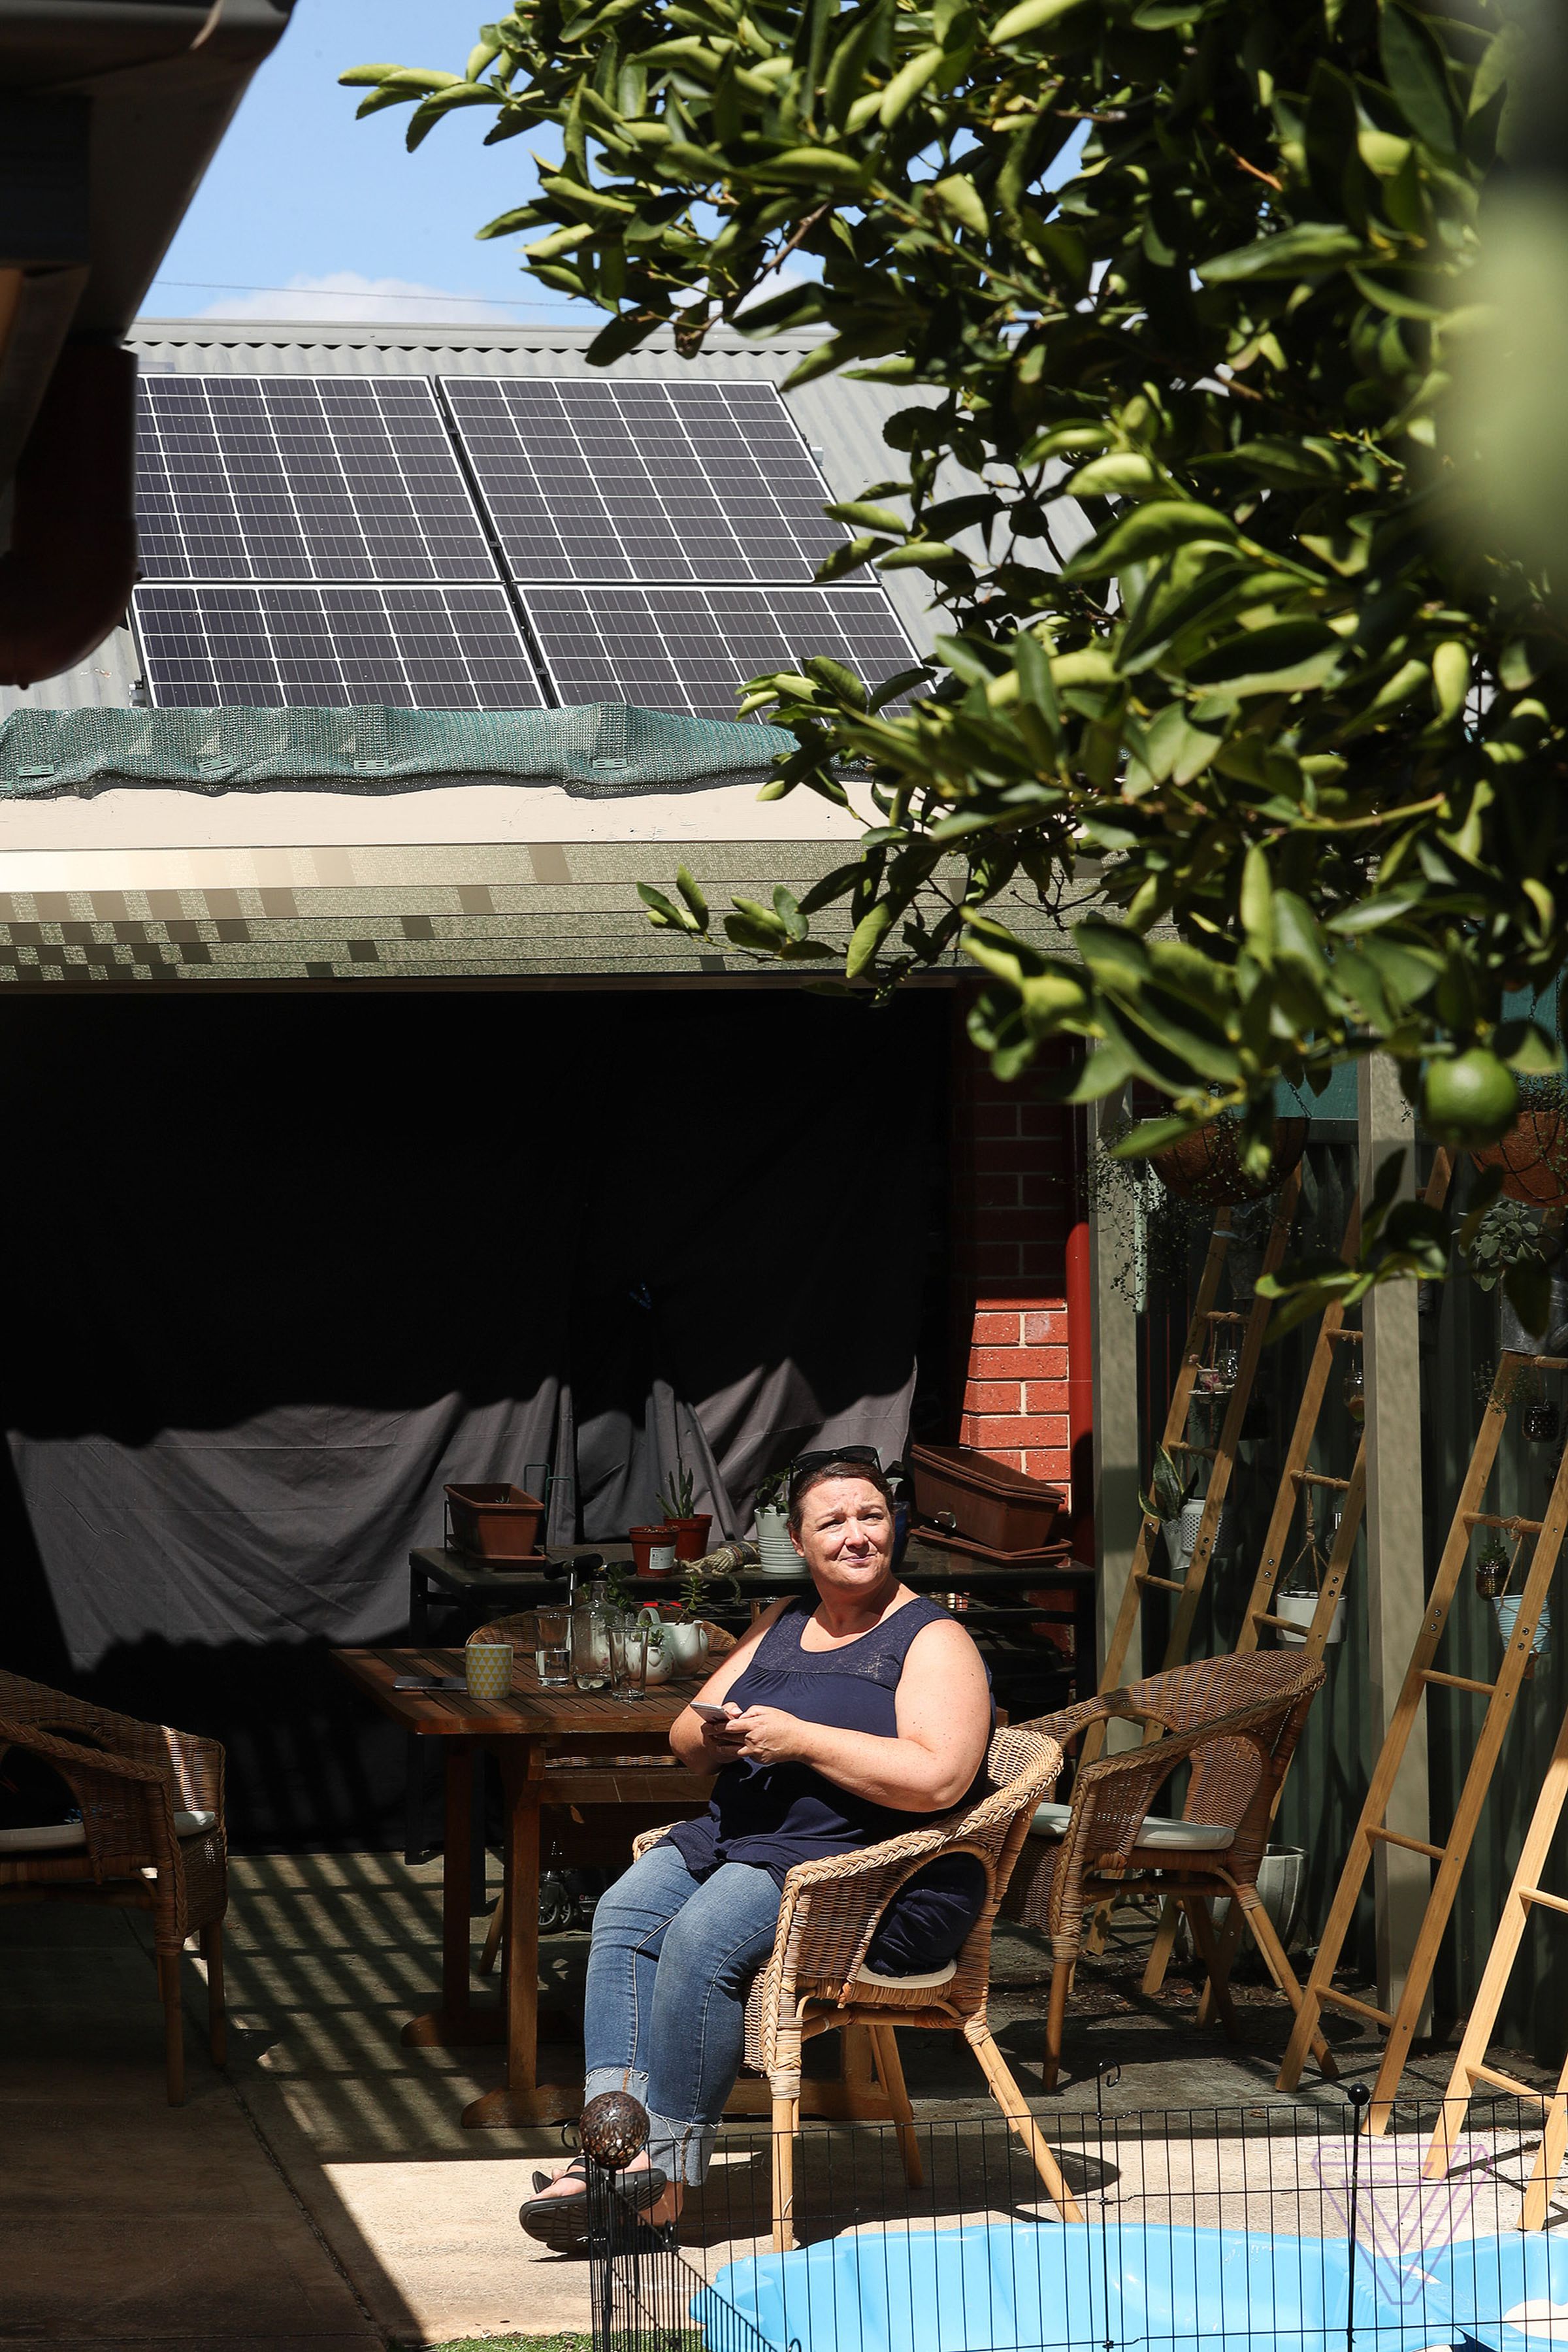 Victoria Townsend has a Tesla battery and solar panels at their home in Dover Gardens, Adelaide, South Australia.